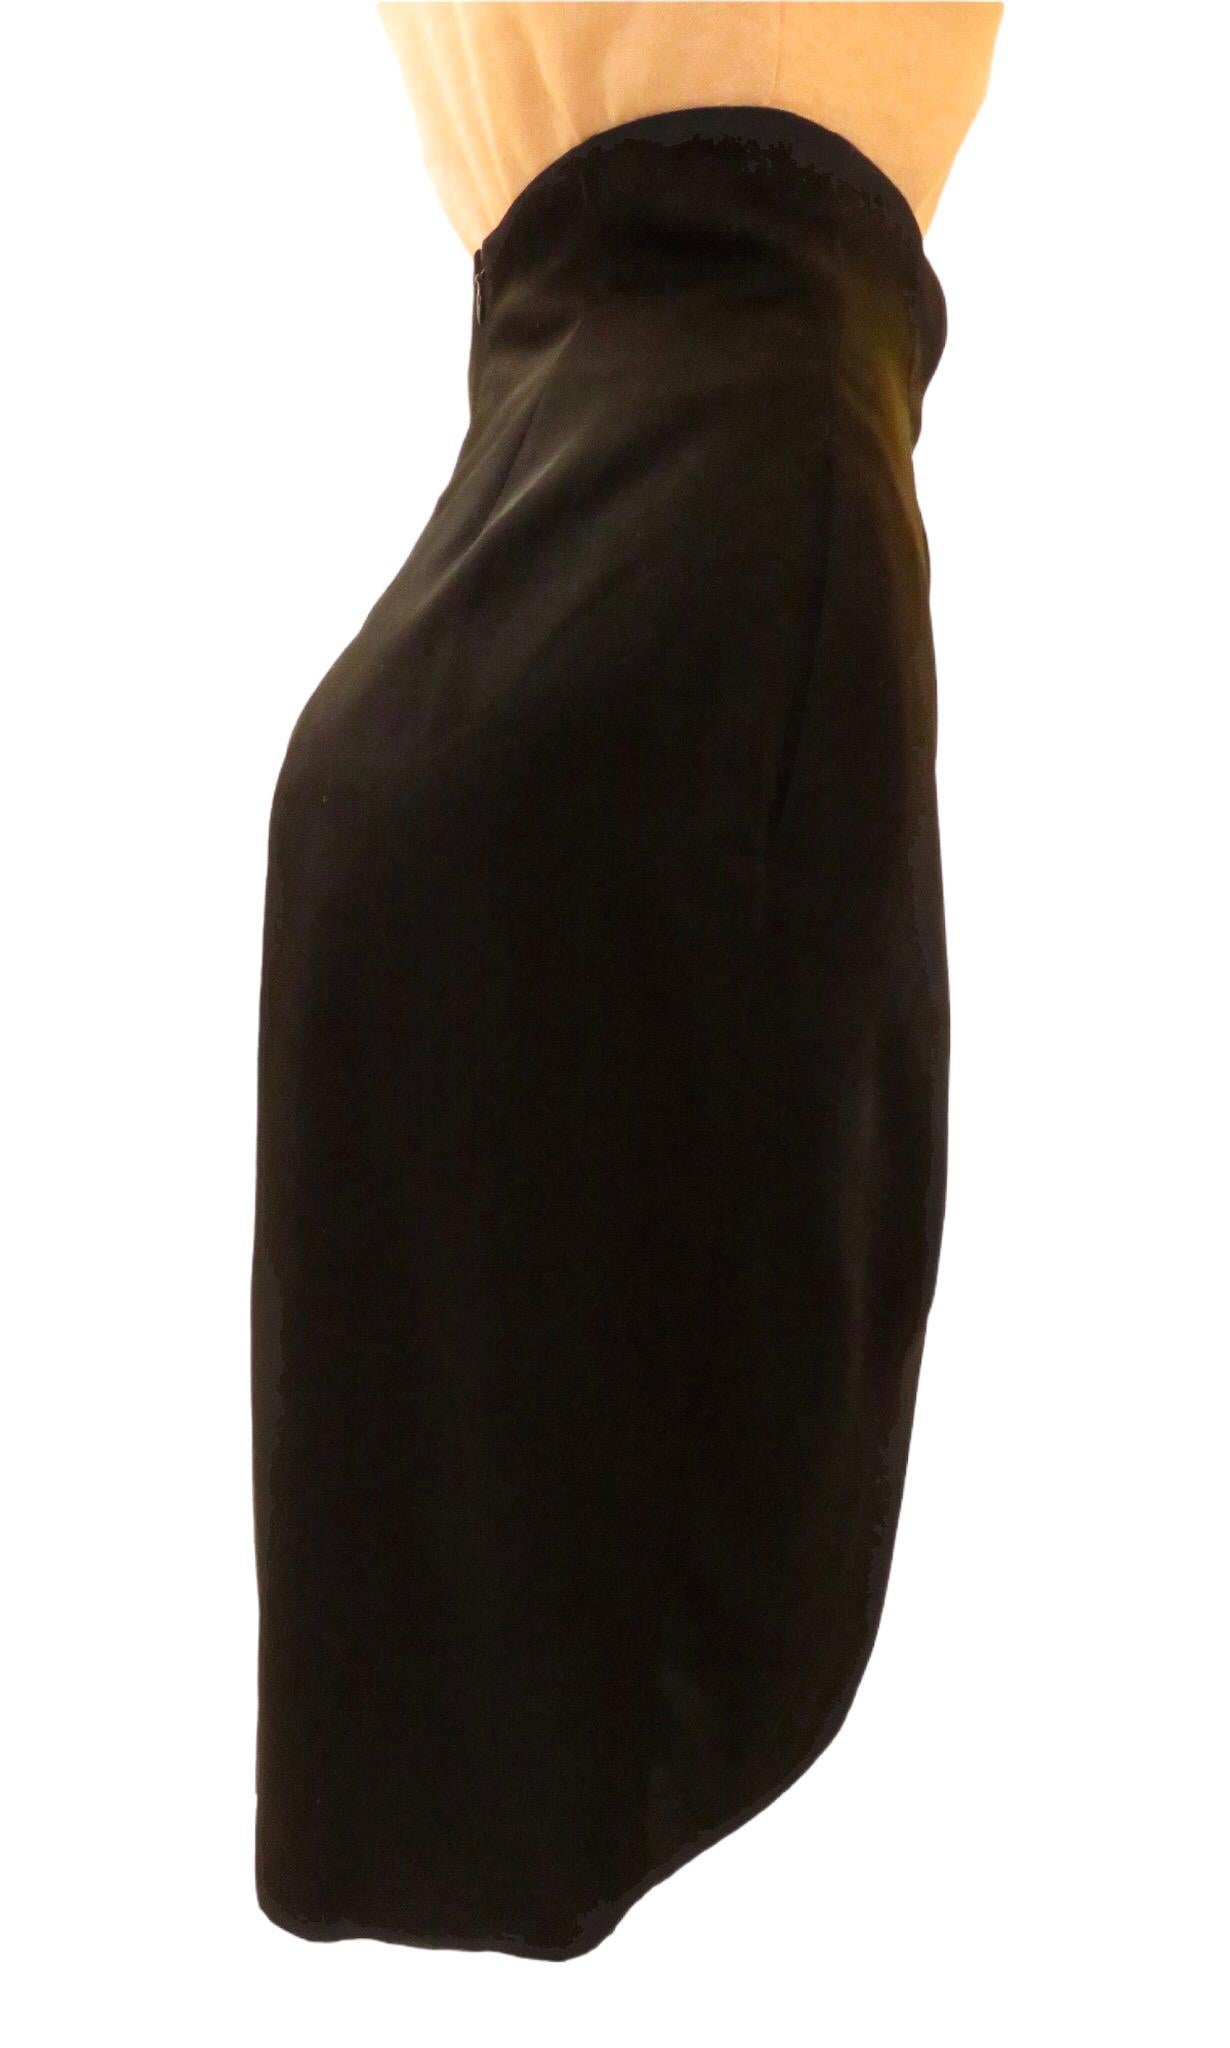 Chantal Thomass High-waisted Belted Pencil Skirt In New Condition For Sale In Laguna Beach, CA